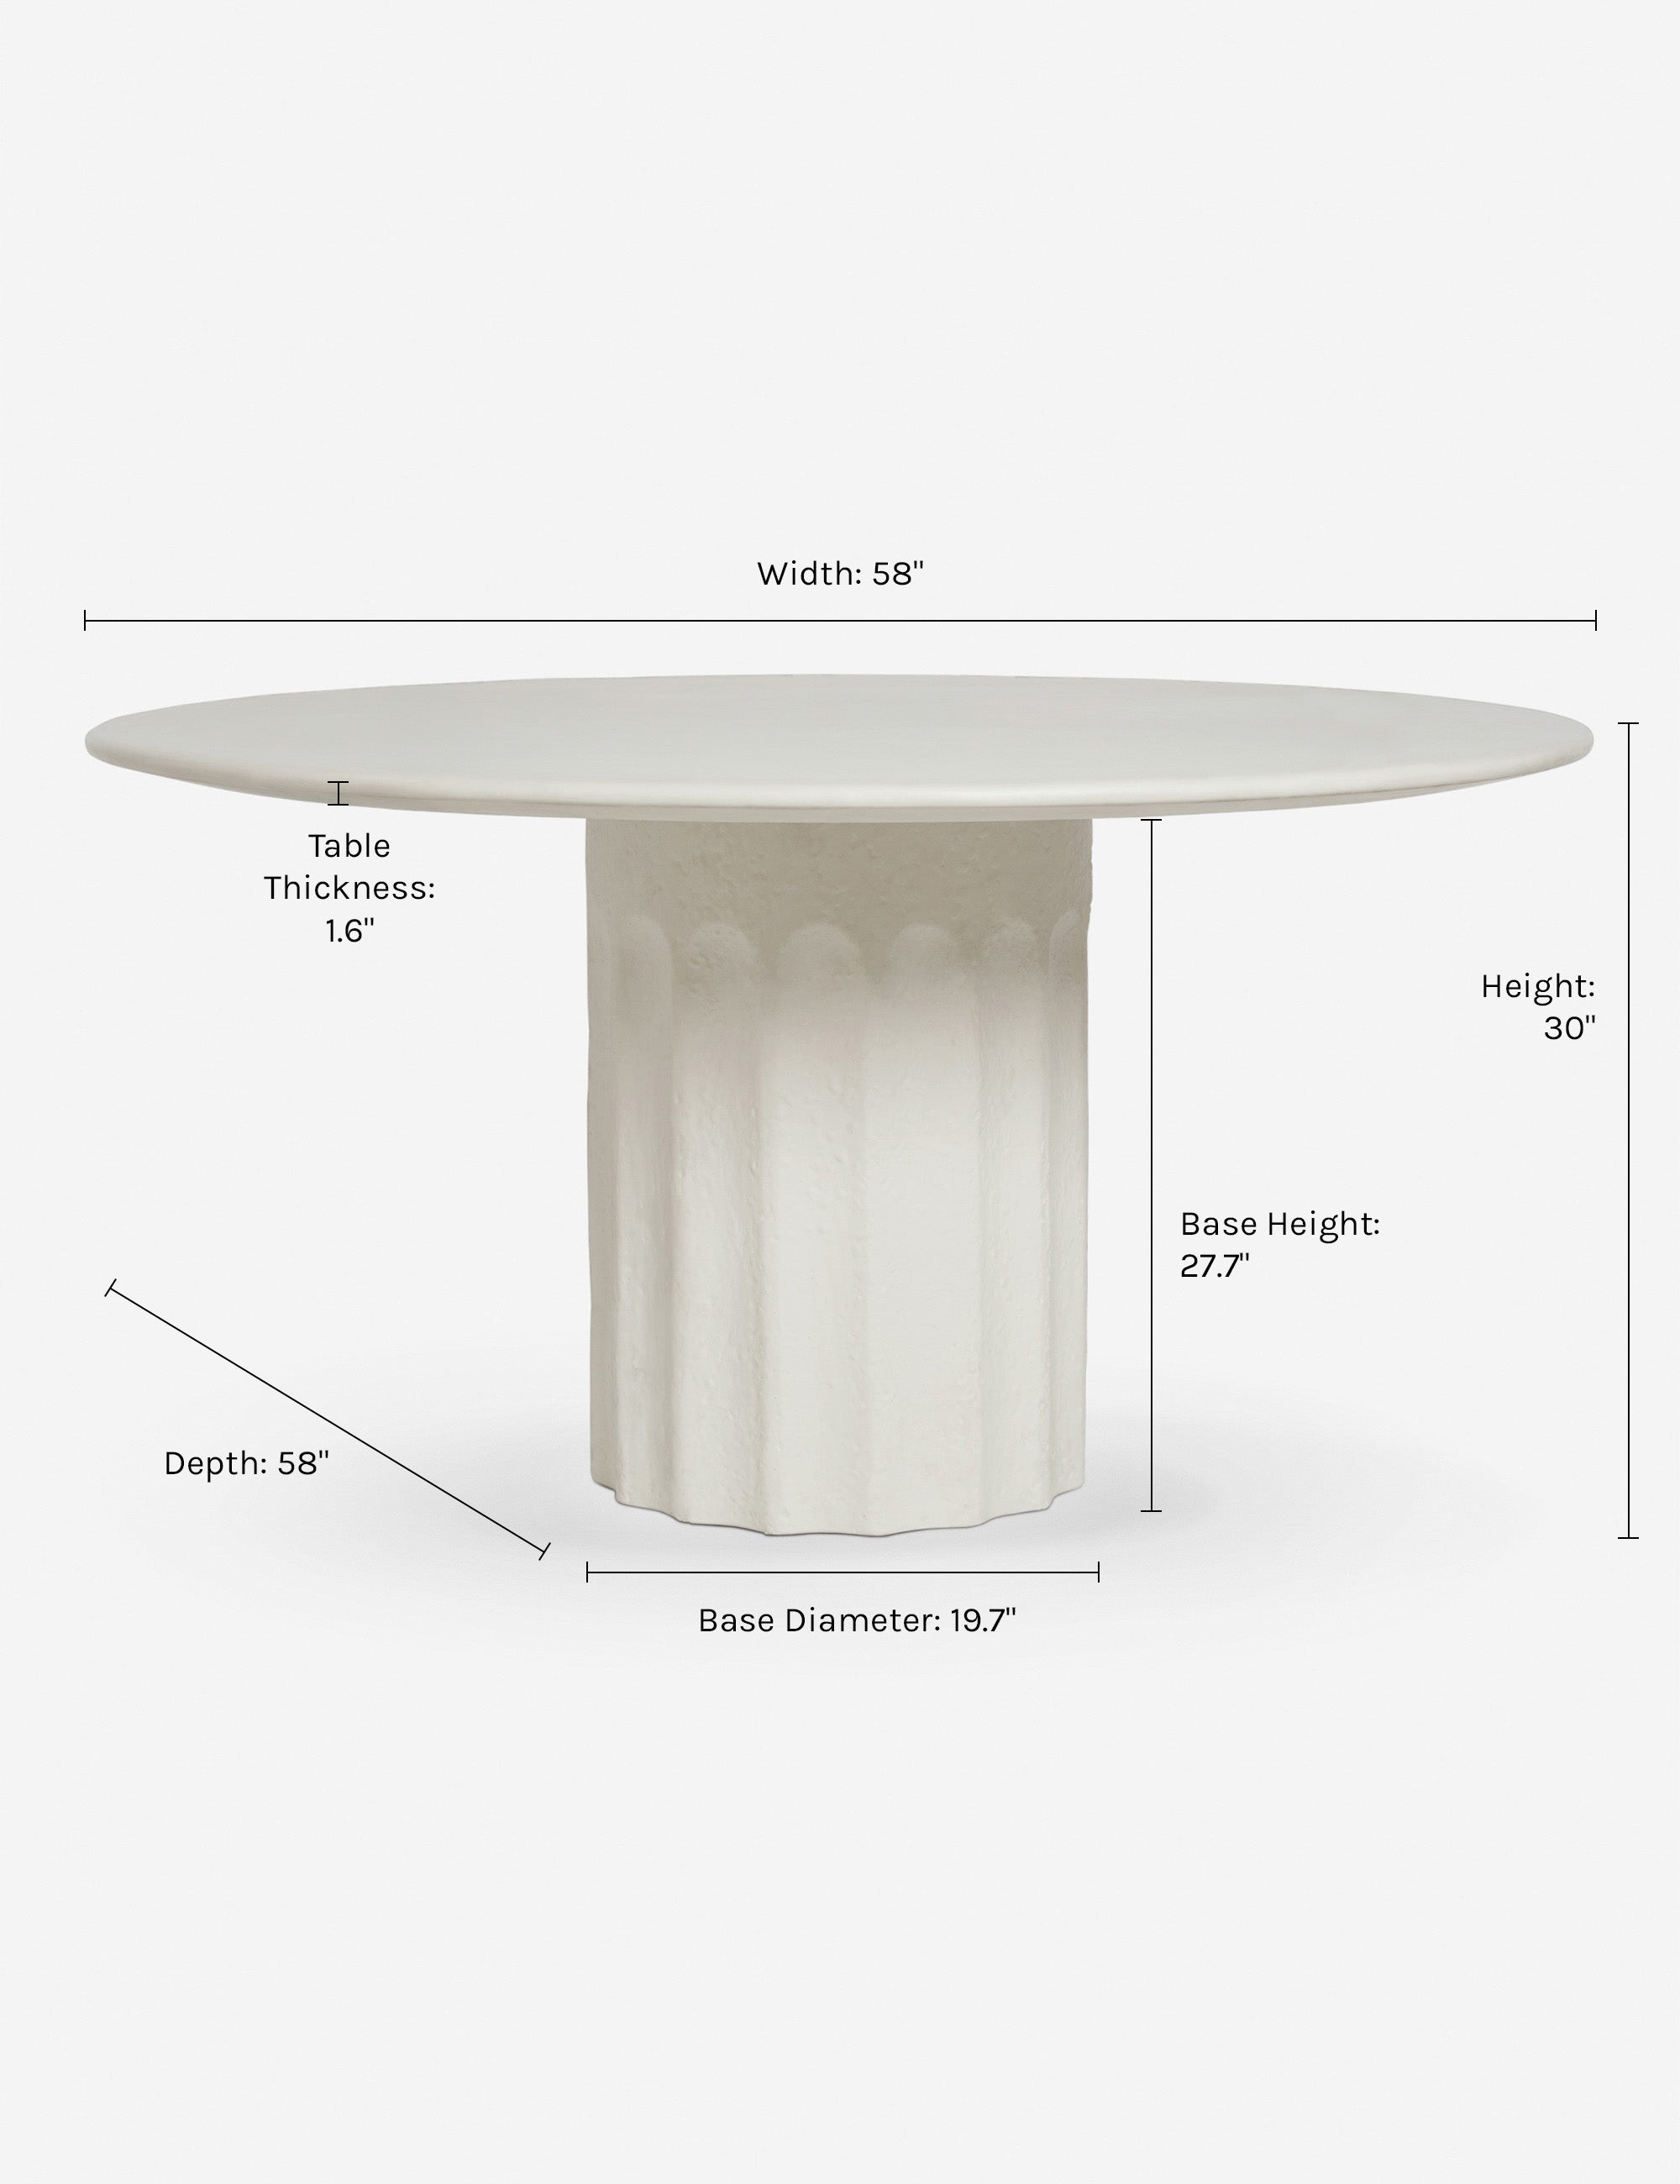 Dimensions on the Doric white round dining table